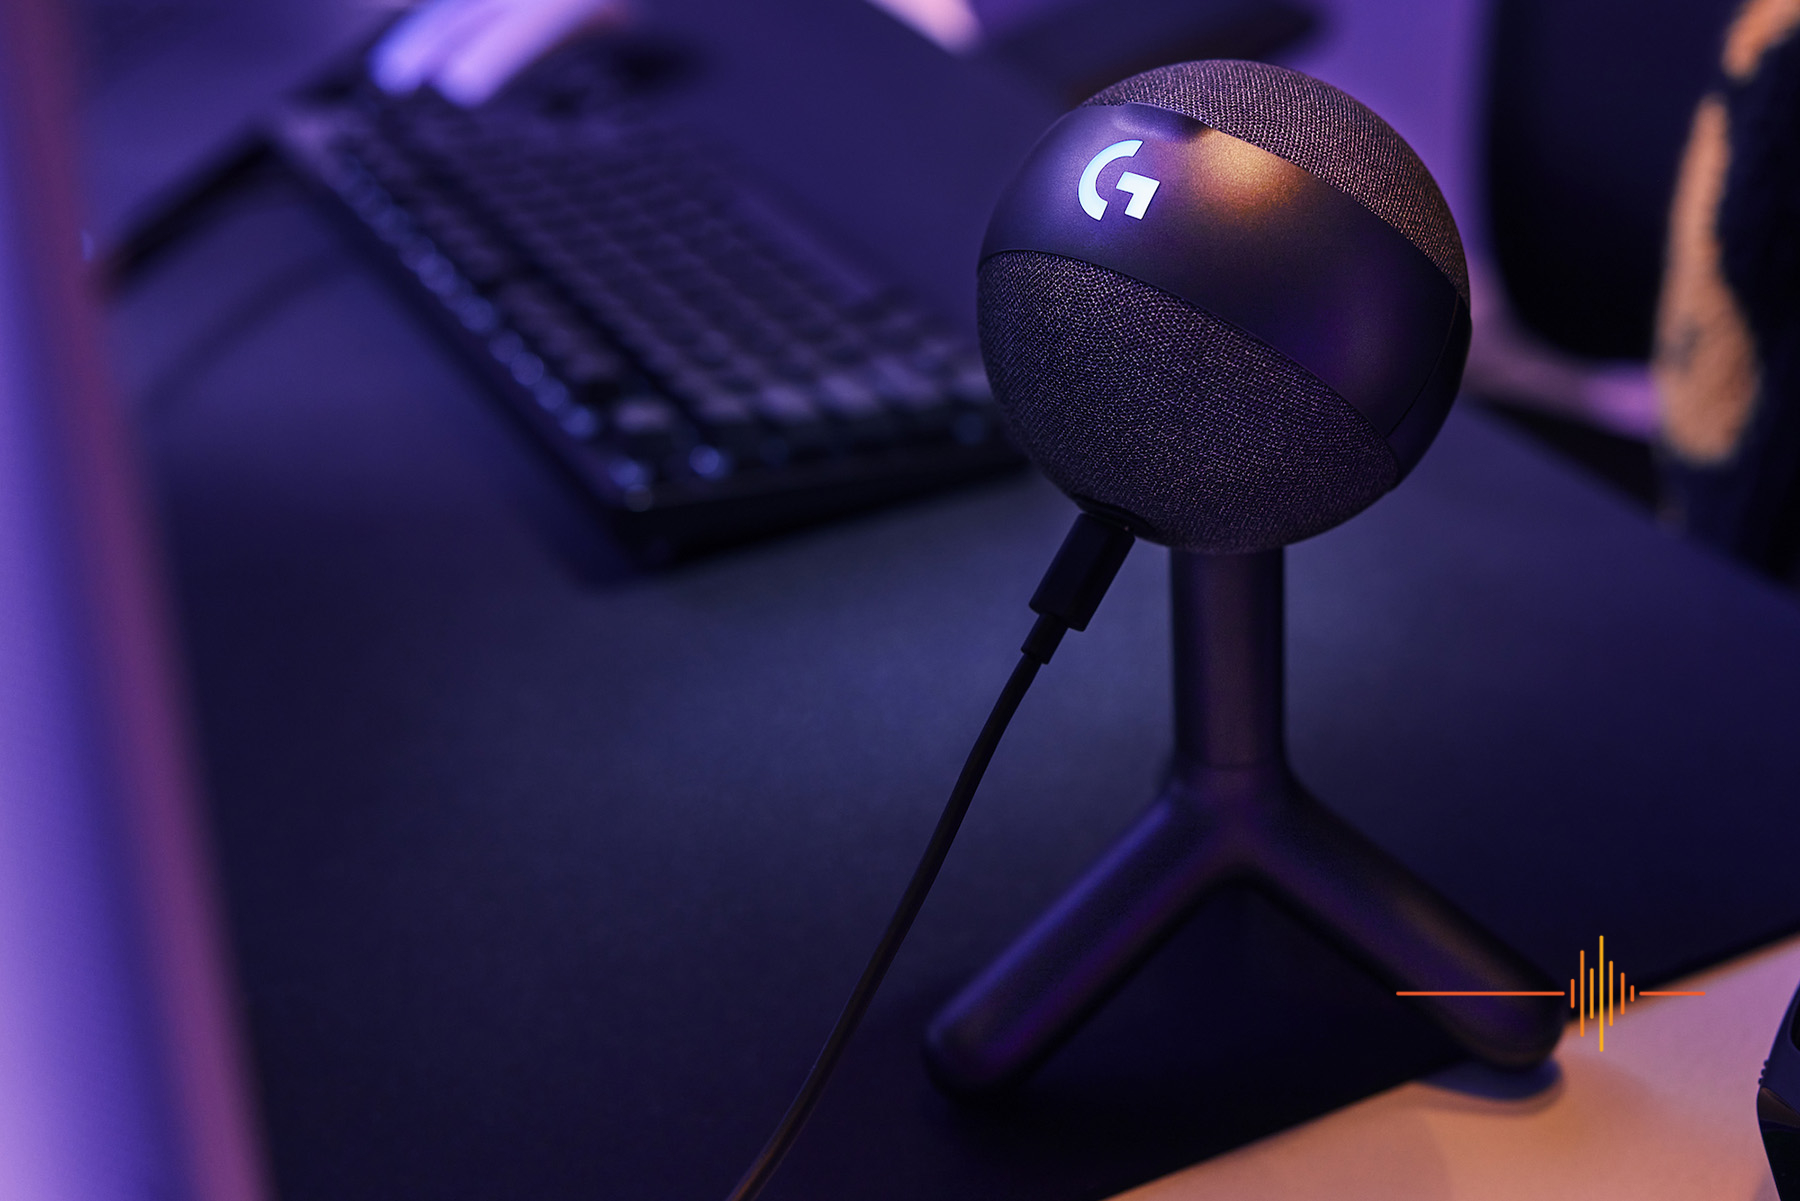 Logitech G Yeti Orb Is a Plug-and-Play LIGHTSYNC-Compatible